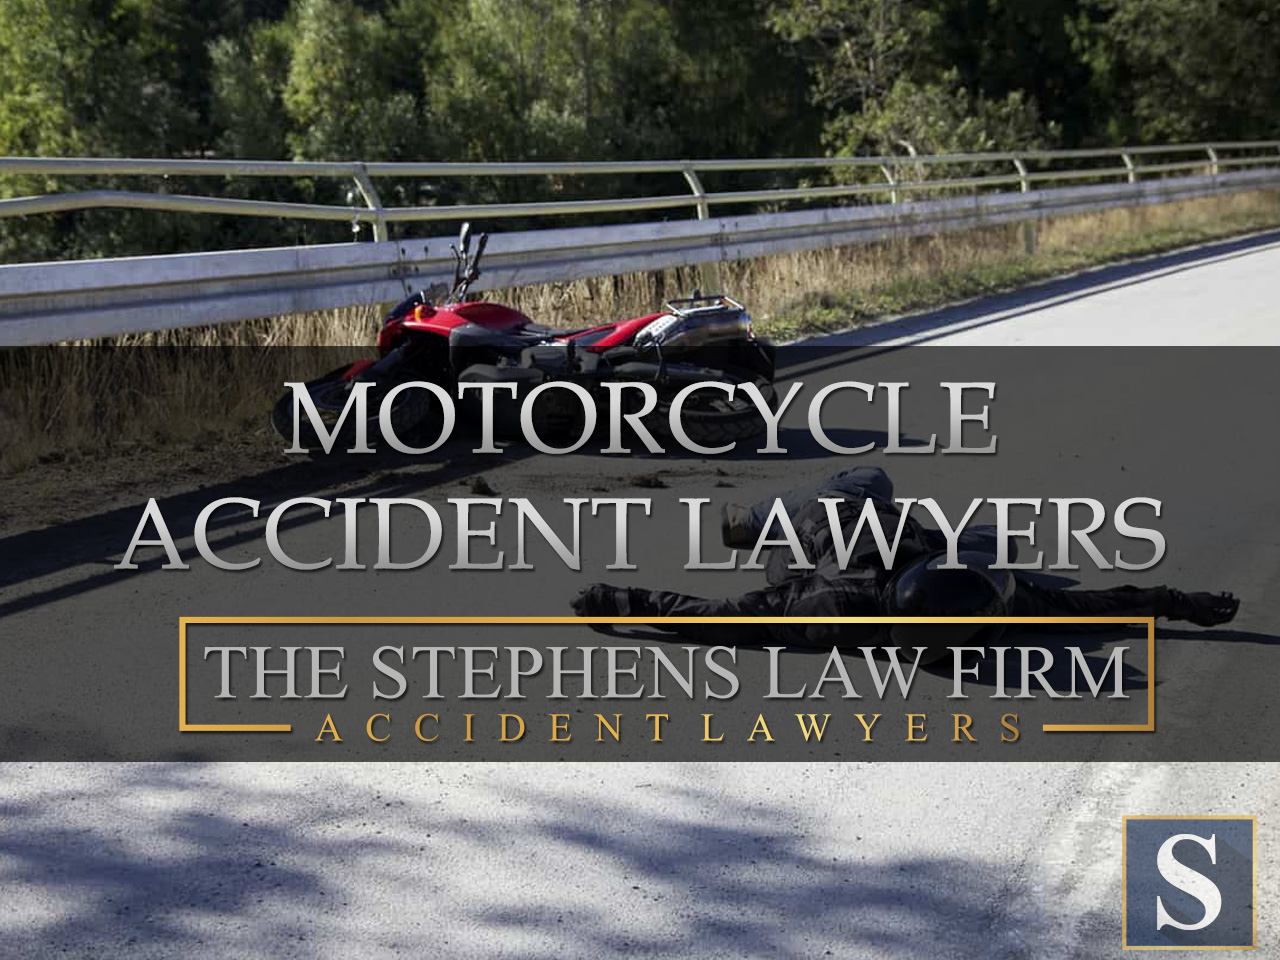 The Stephens Law Firm Accident Lawyers Katy, TX